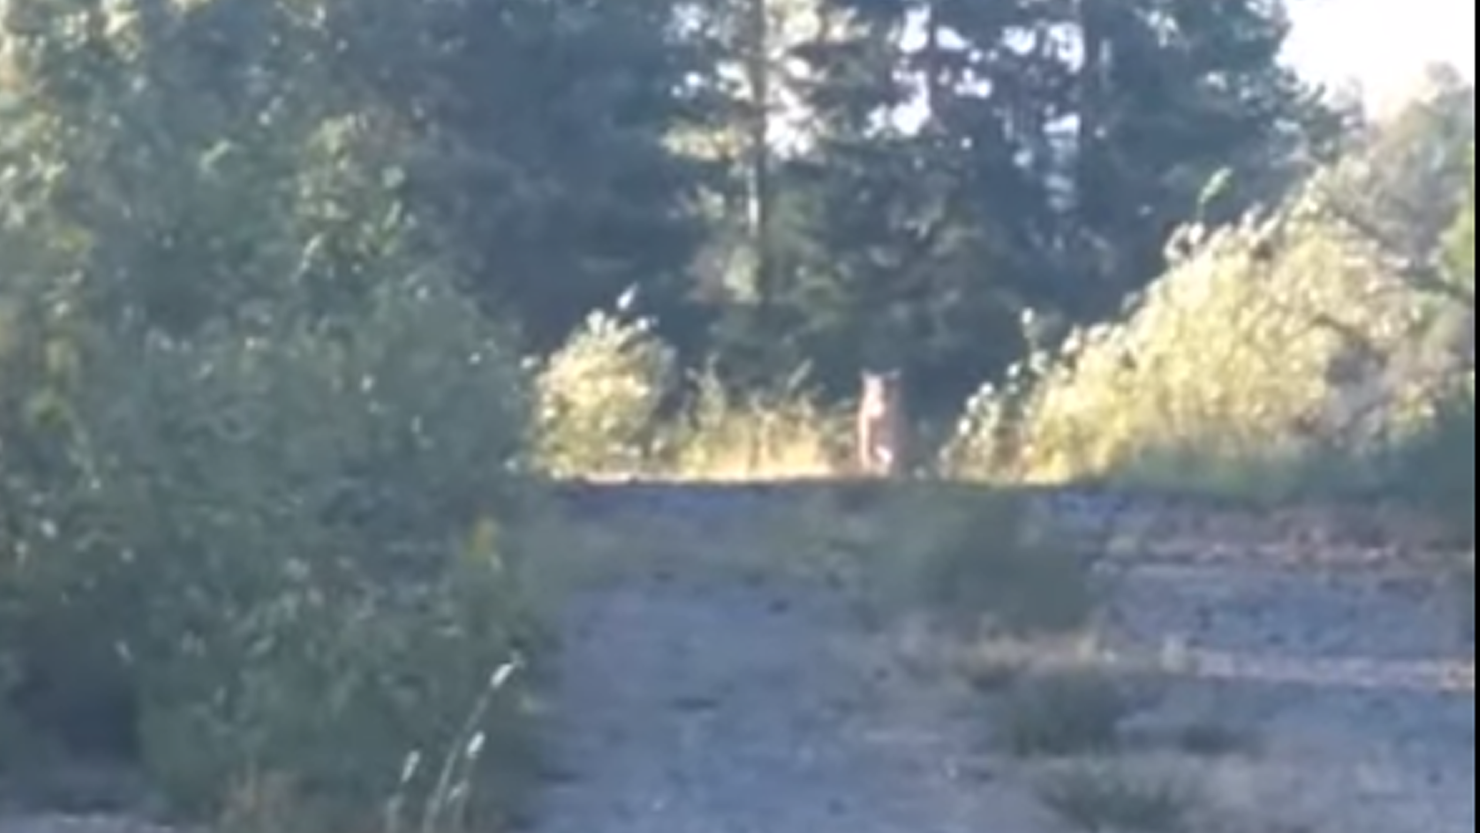 hungry cougar scared off by woman blasting Metallica